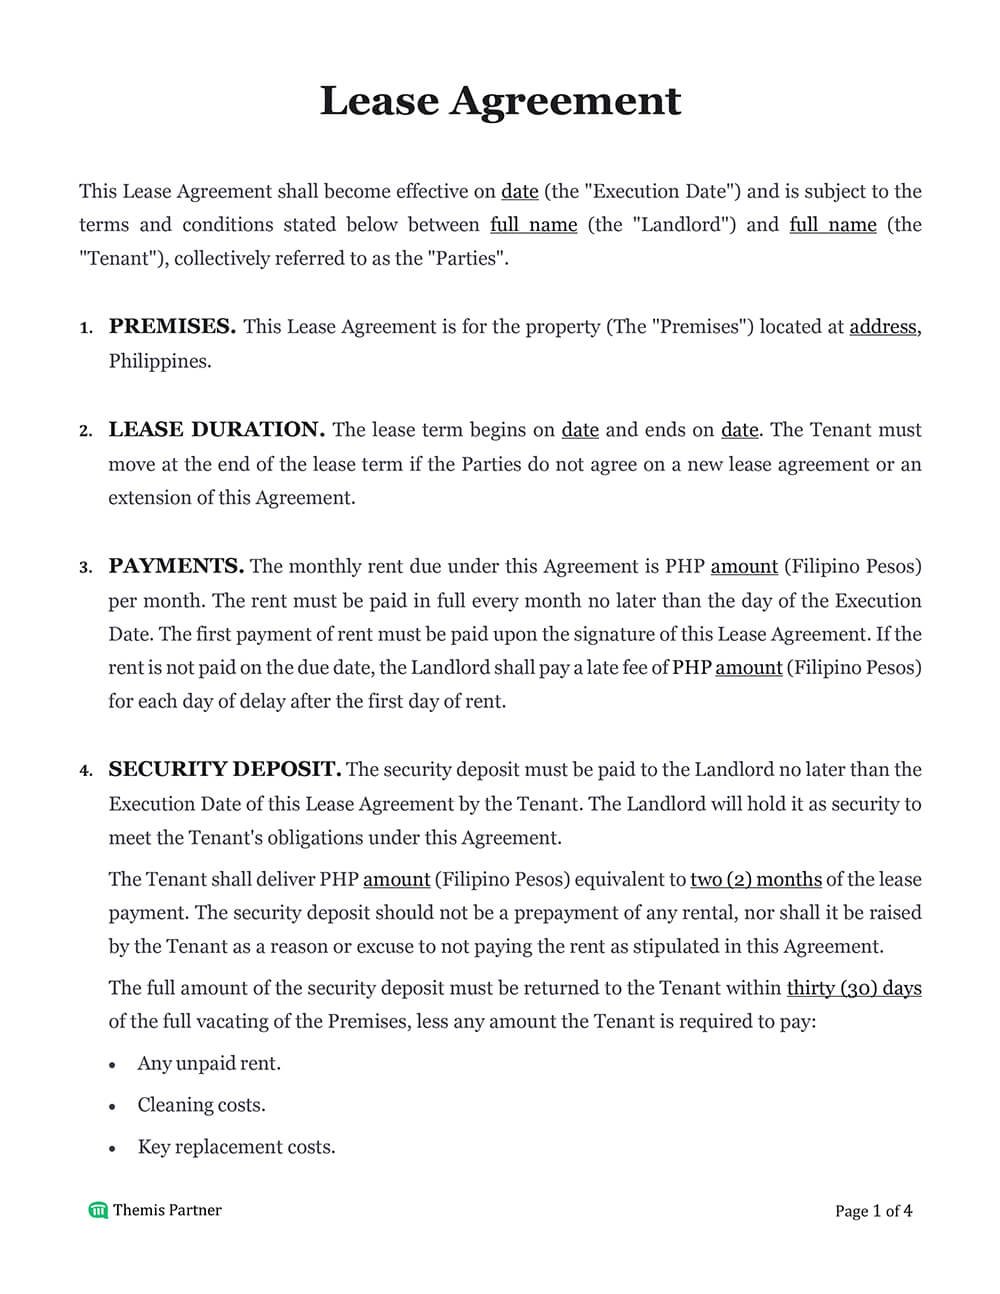 Lease agreement template